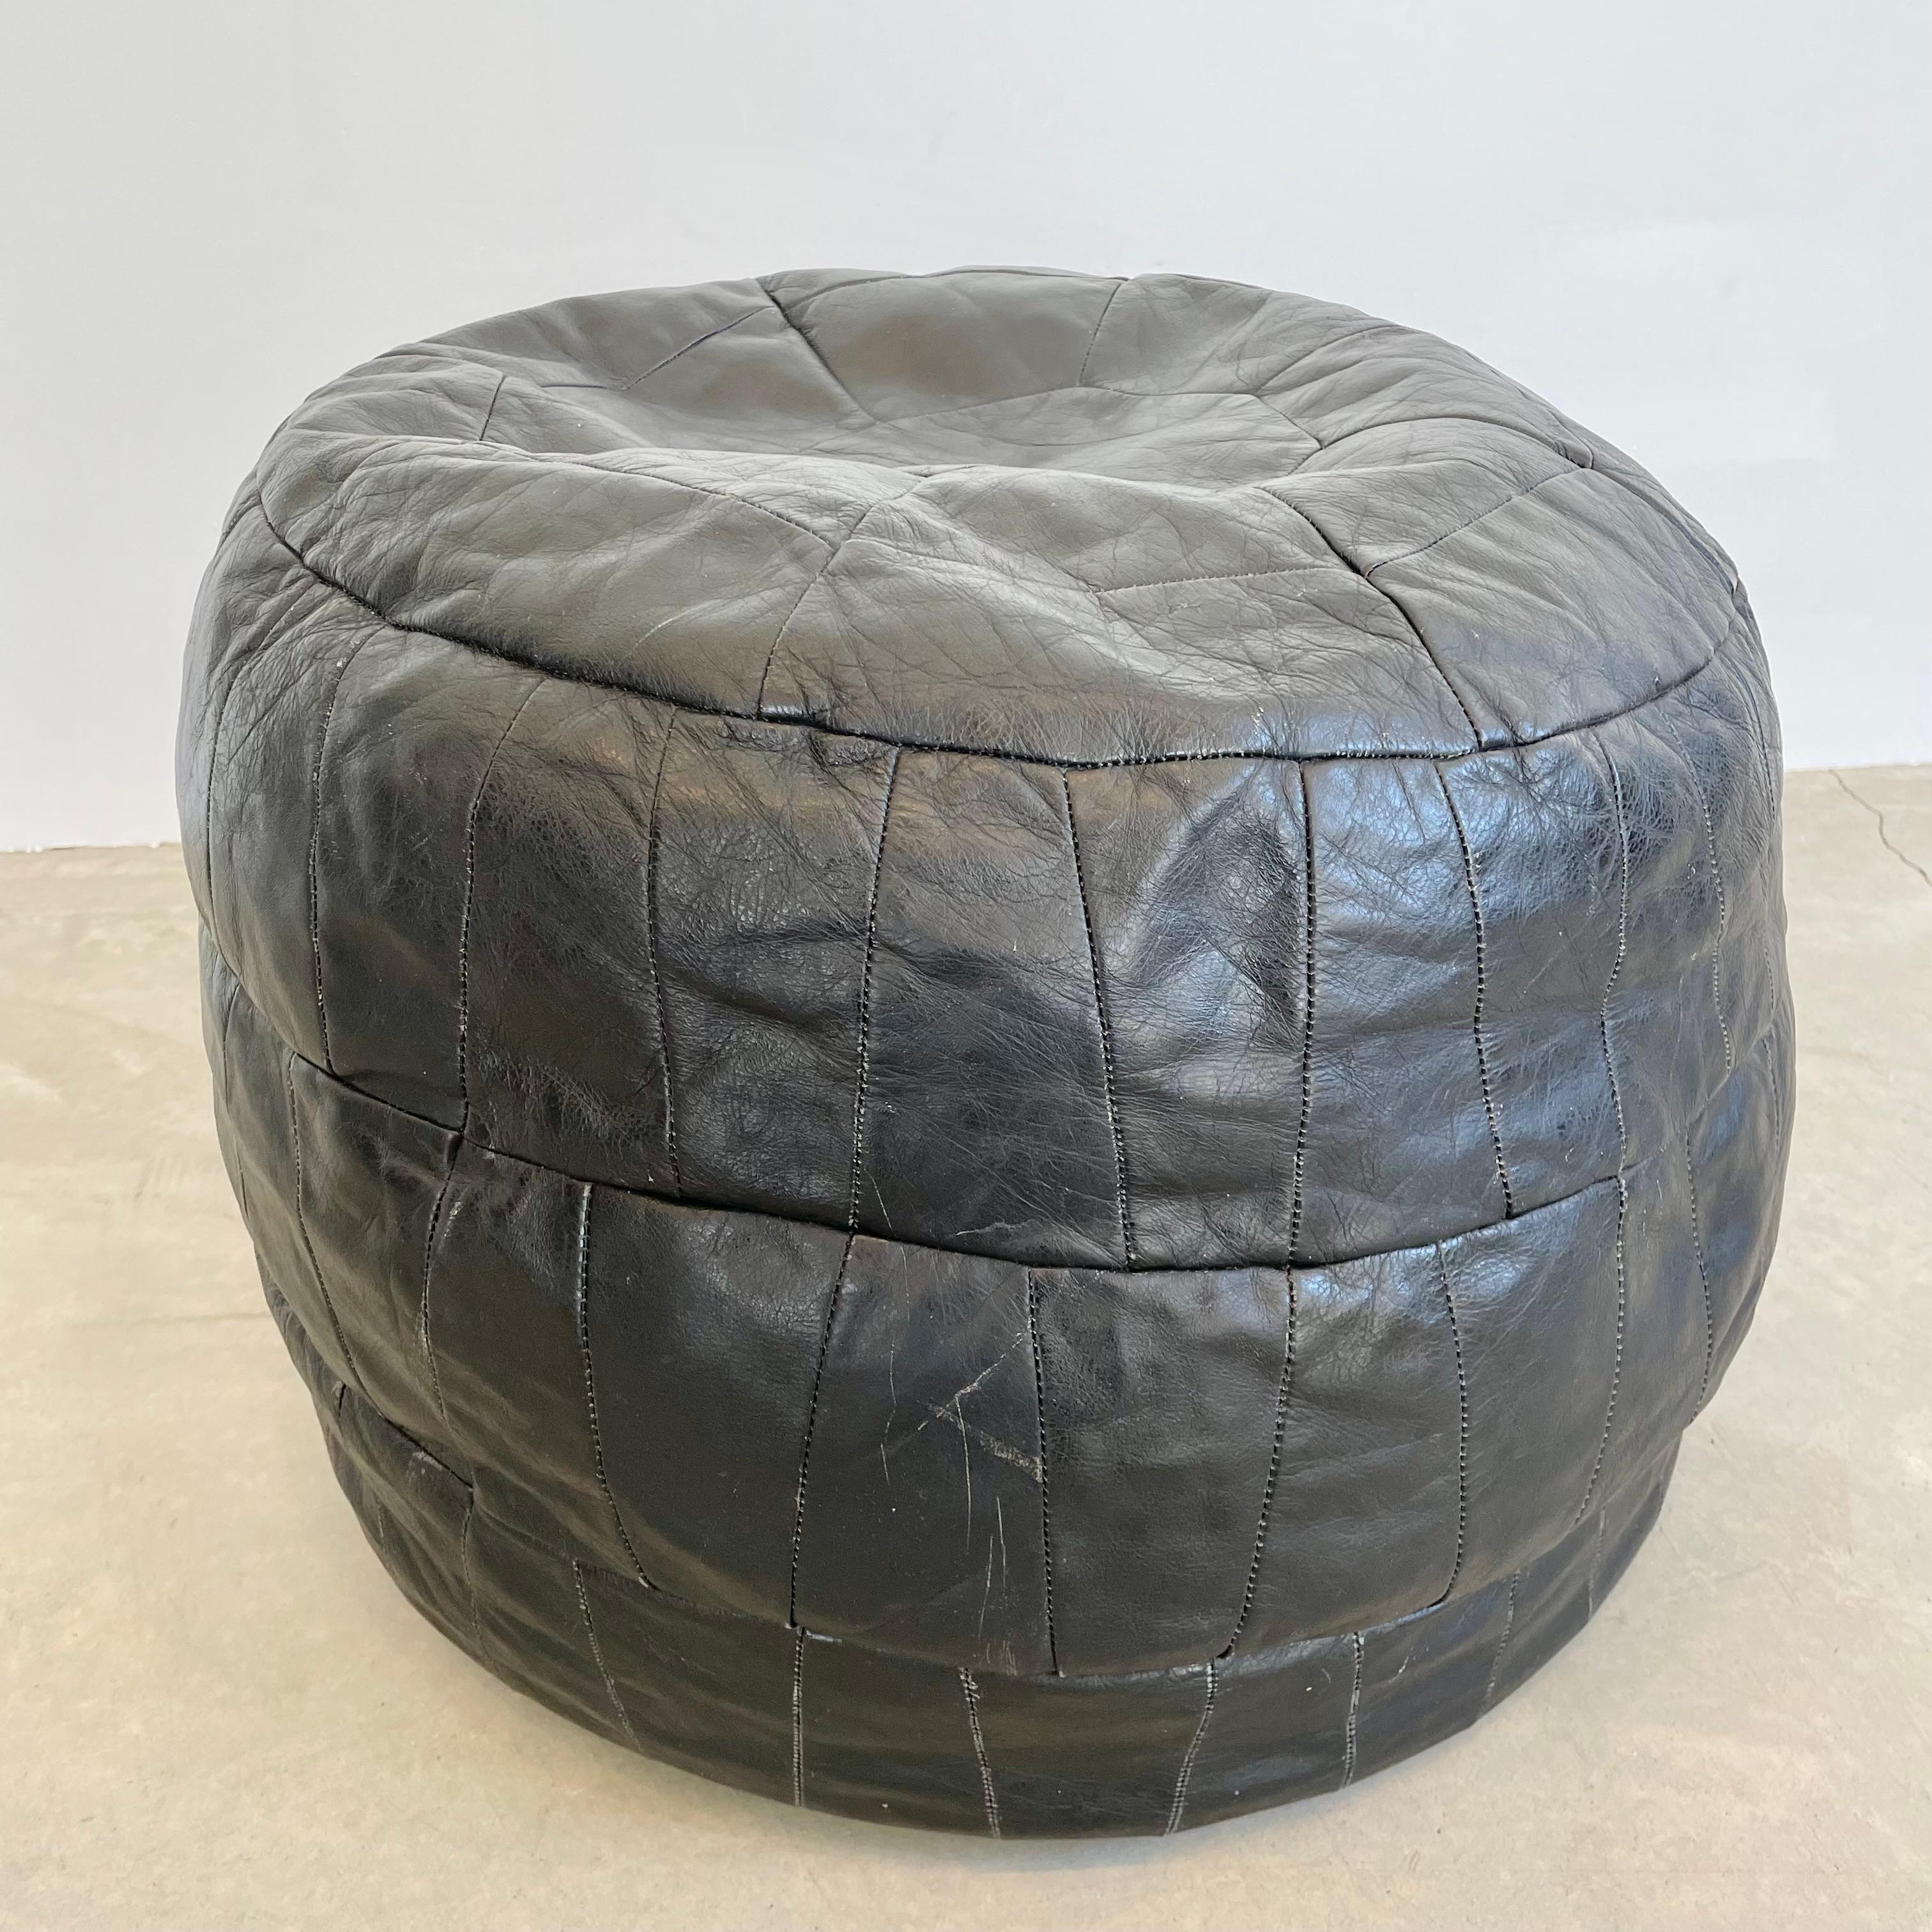 Oversized De Sede Black Leather Patchwork Ottoman, 1960s Switzerland In Good Condition For Sale In Los Angeles, CA